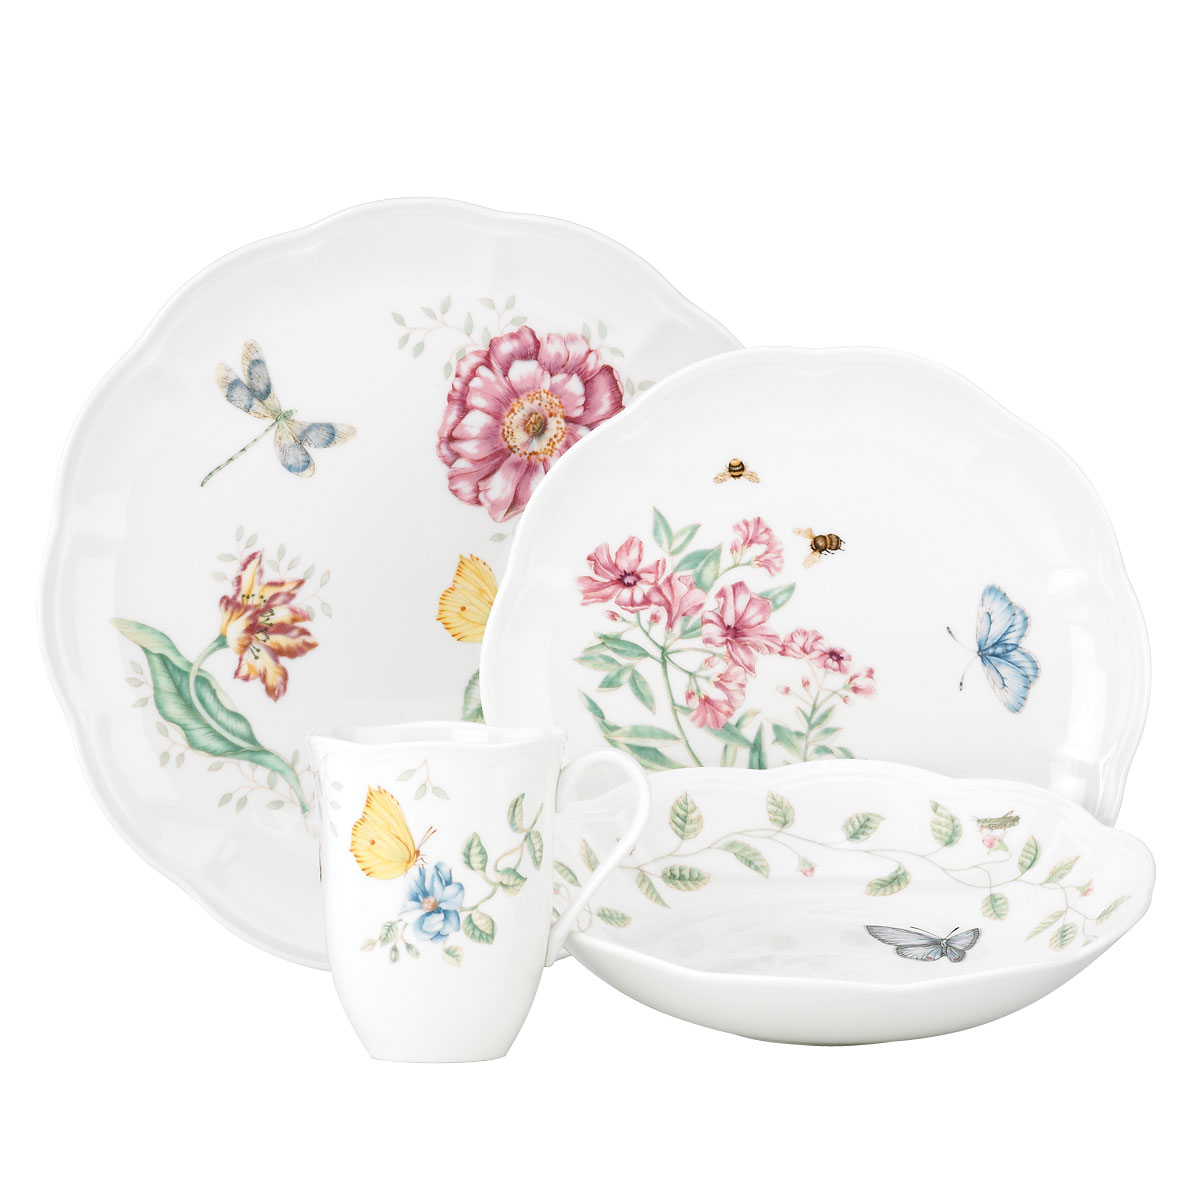 Lenox China Butterfly Meadow, 4 Piece Place Setting